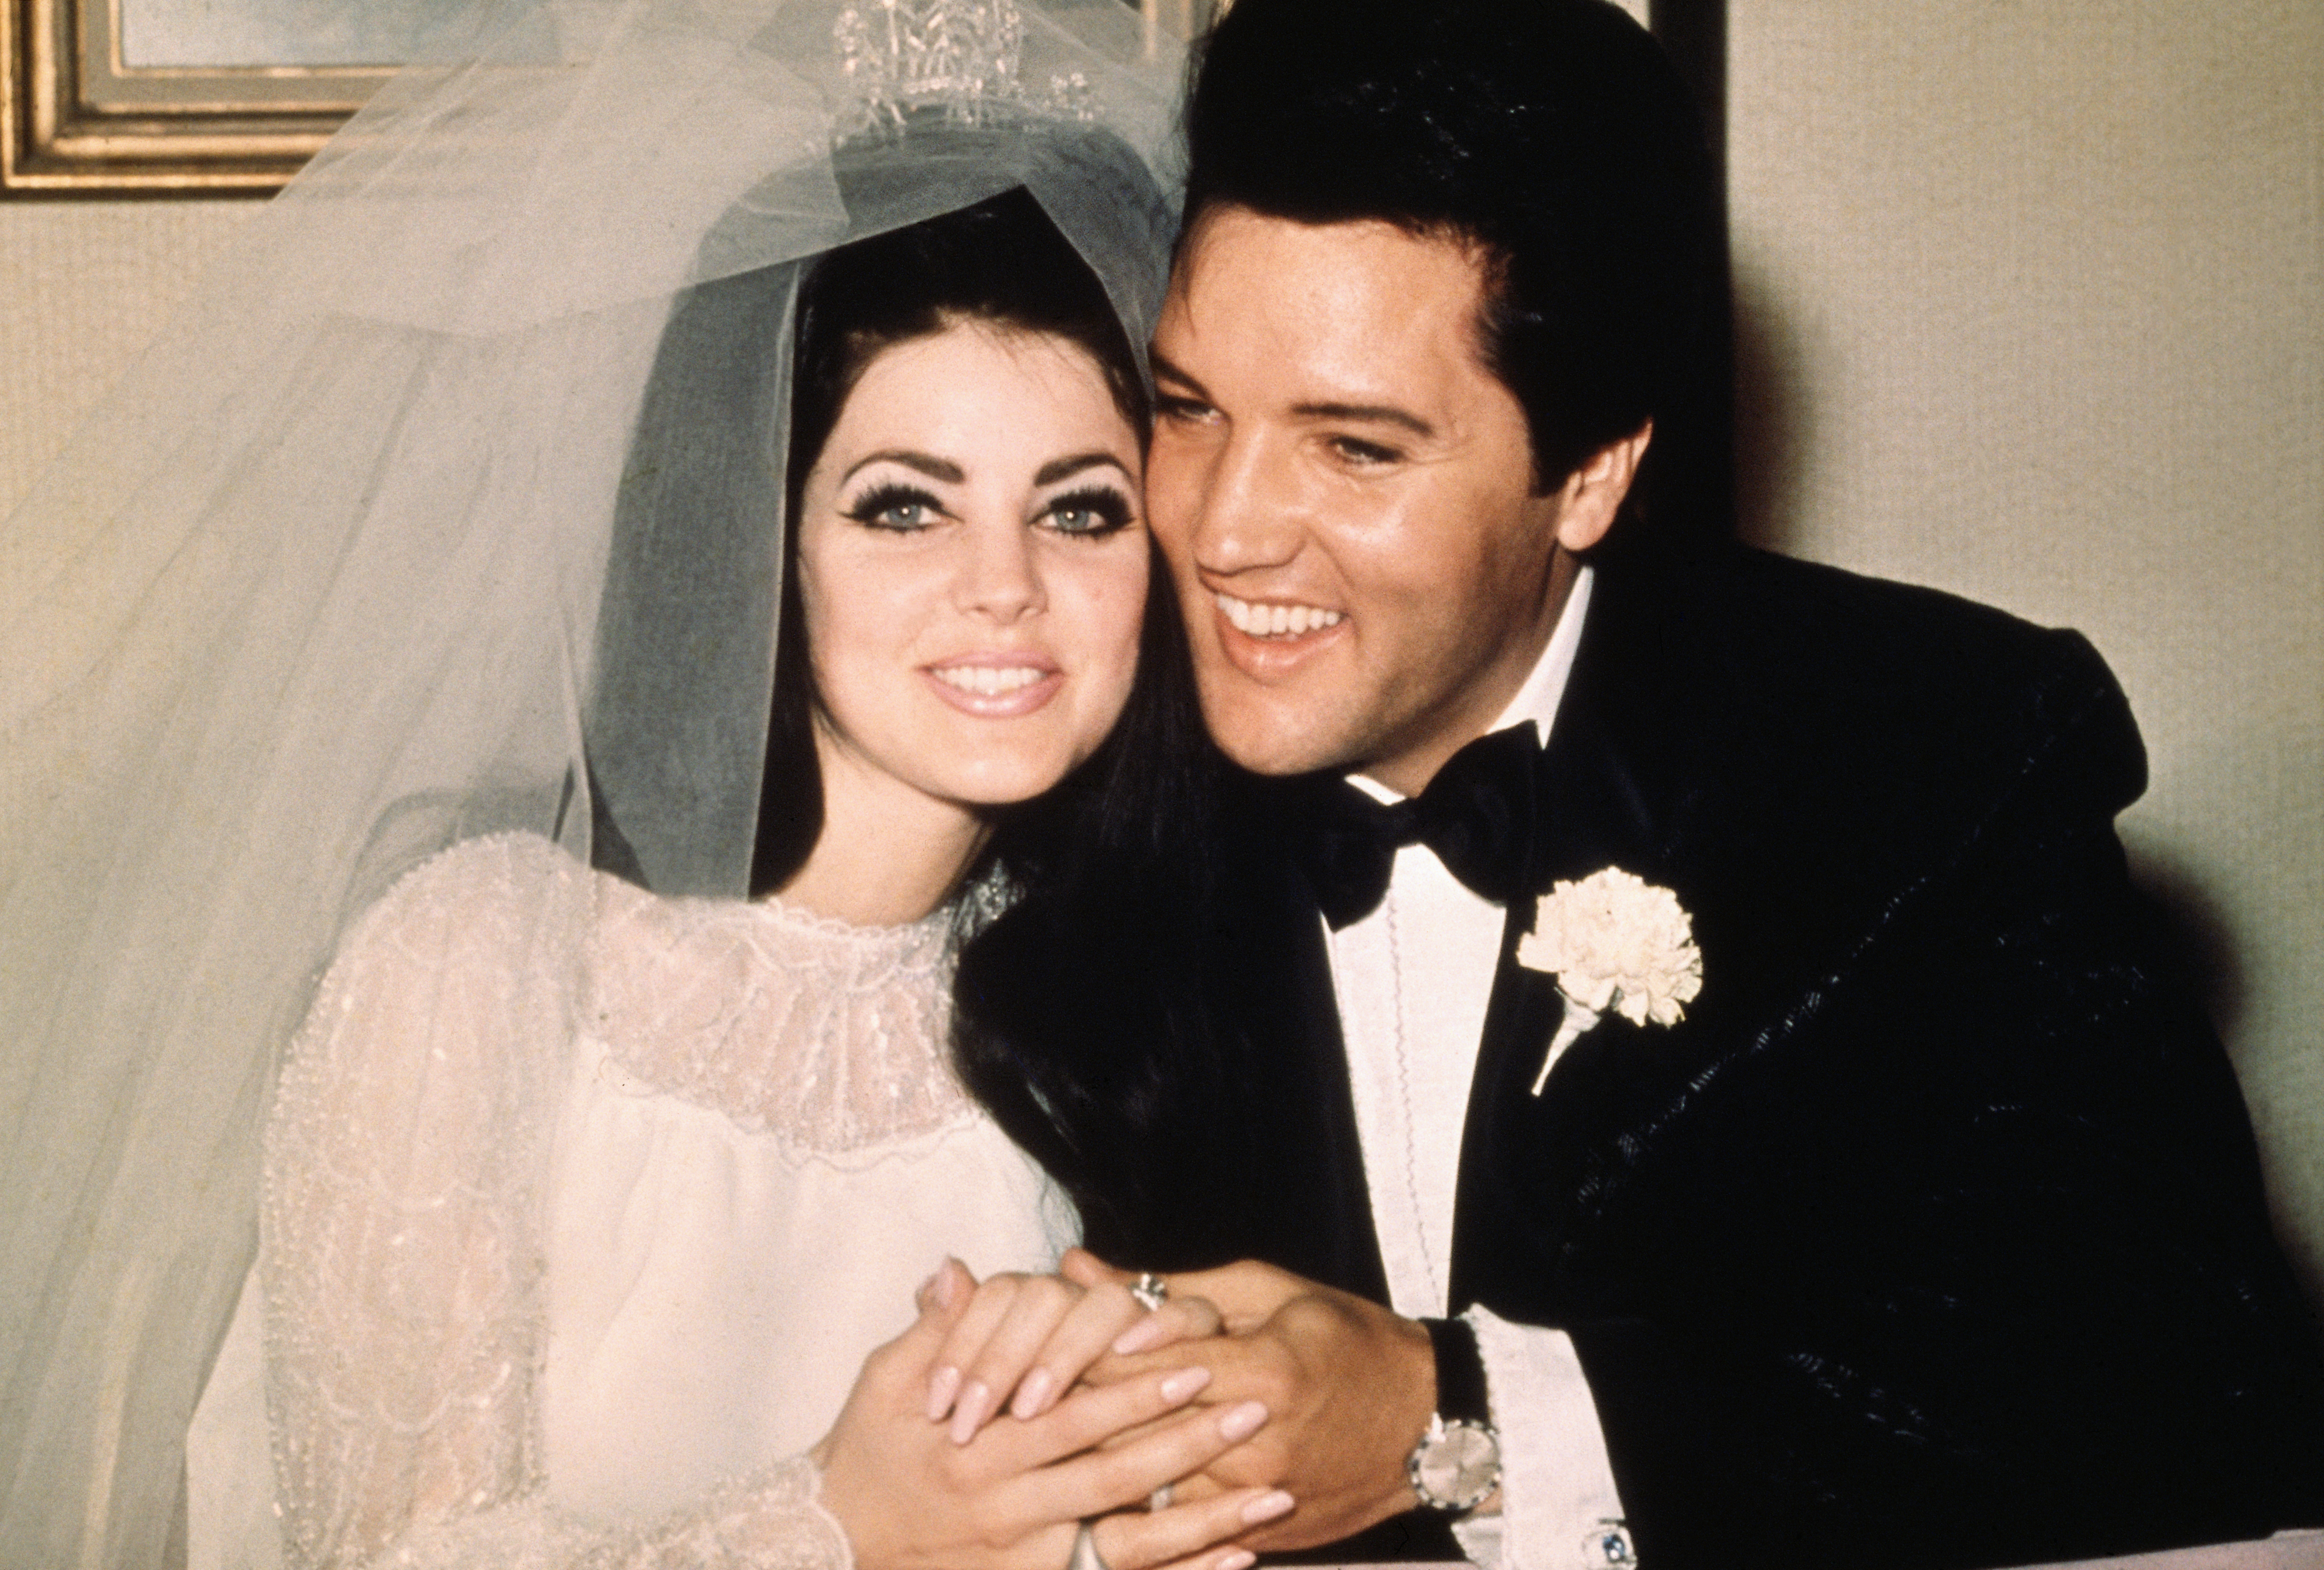 Elvis Presley and Priscilla Presley on their wedding day on May 1, 1967 in Las Vegas, Nevada. | Source: Getty Images